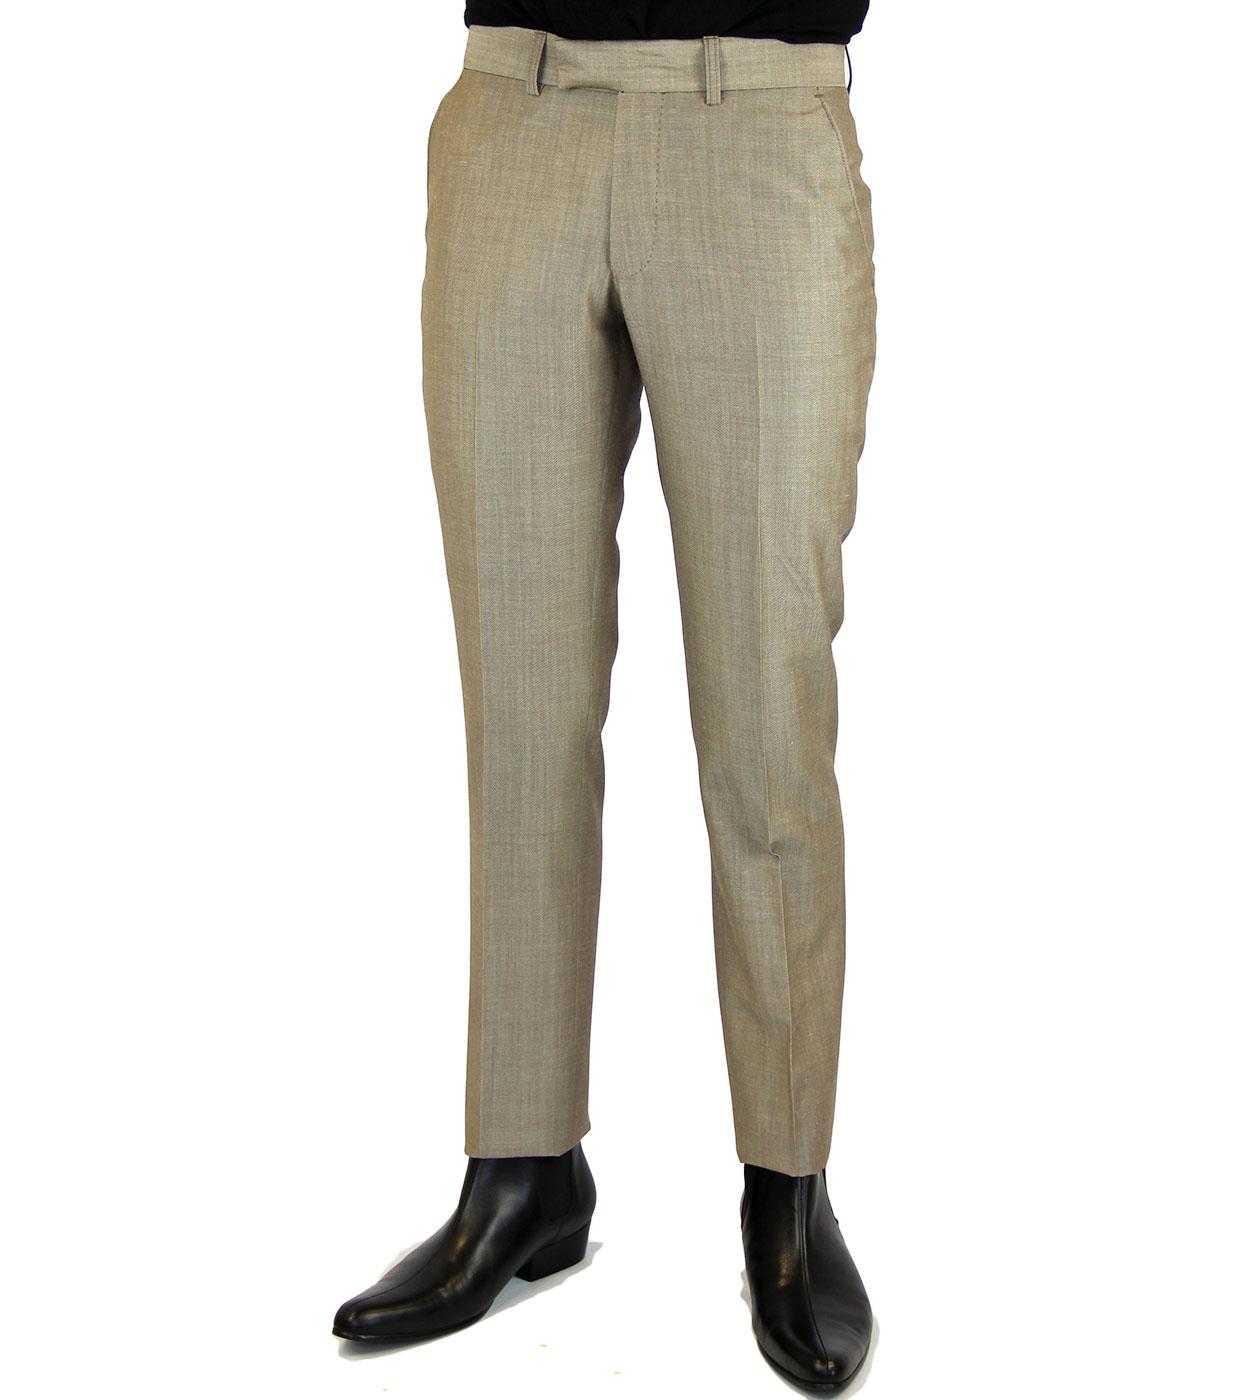 Tailored by Madcap England 60s Mod Mohair Trousers